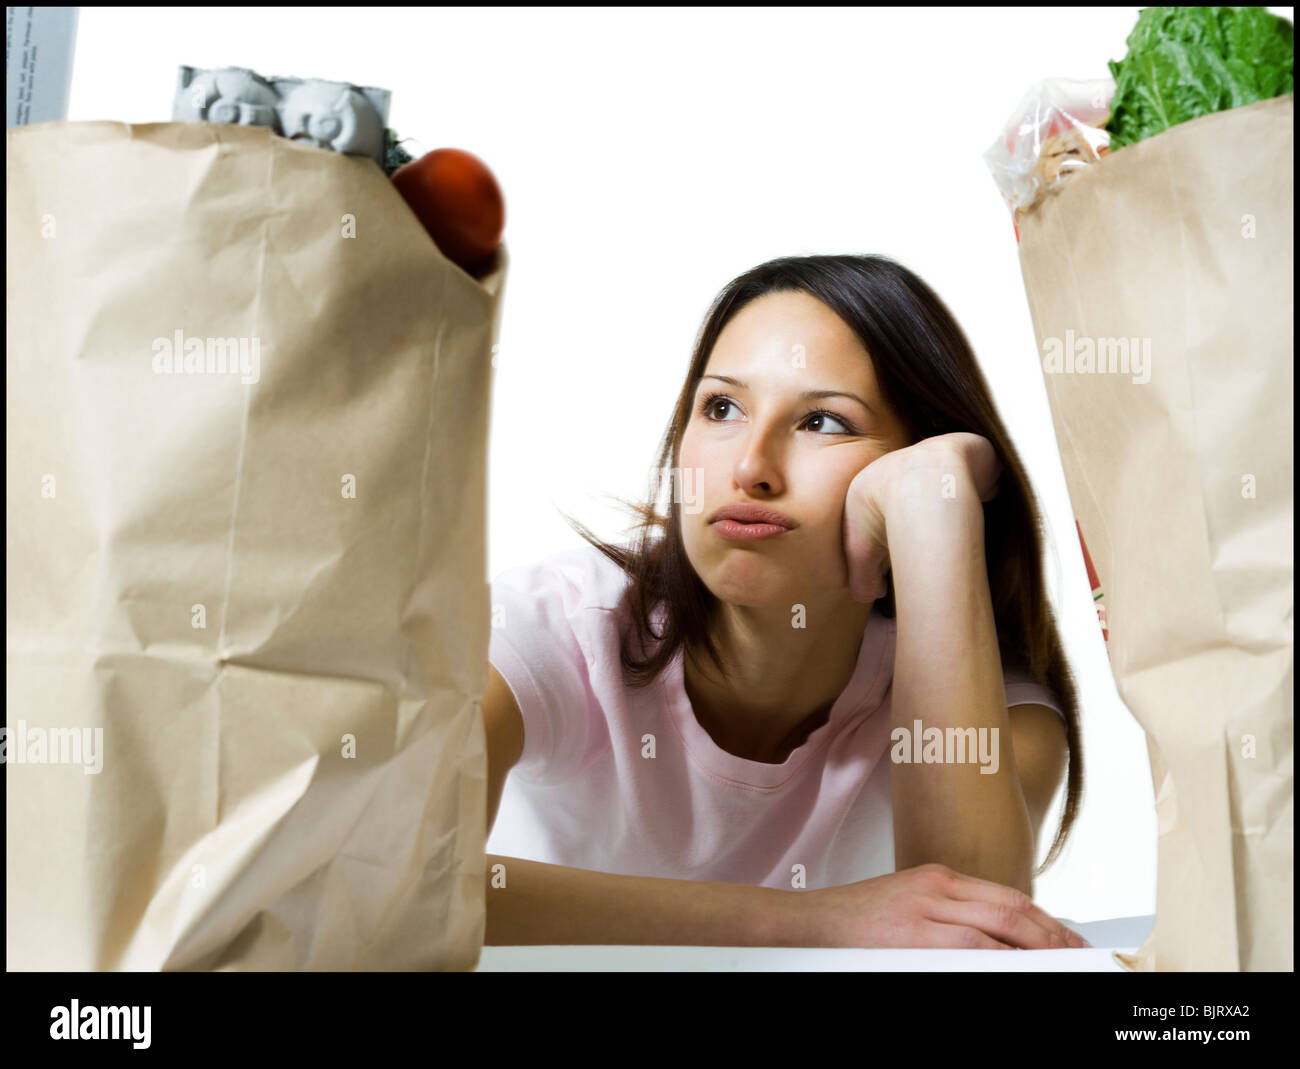 Woman in between two bags of groceries Stock Photo